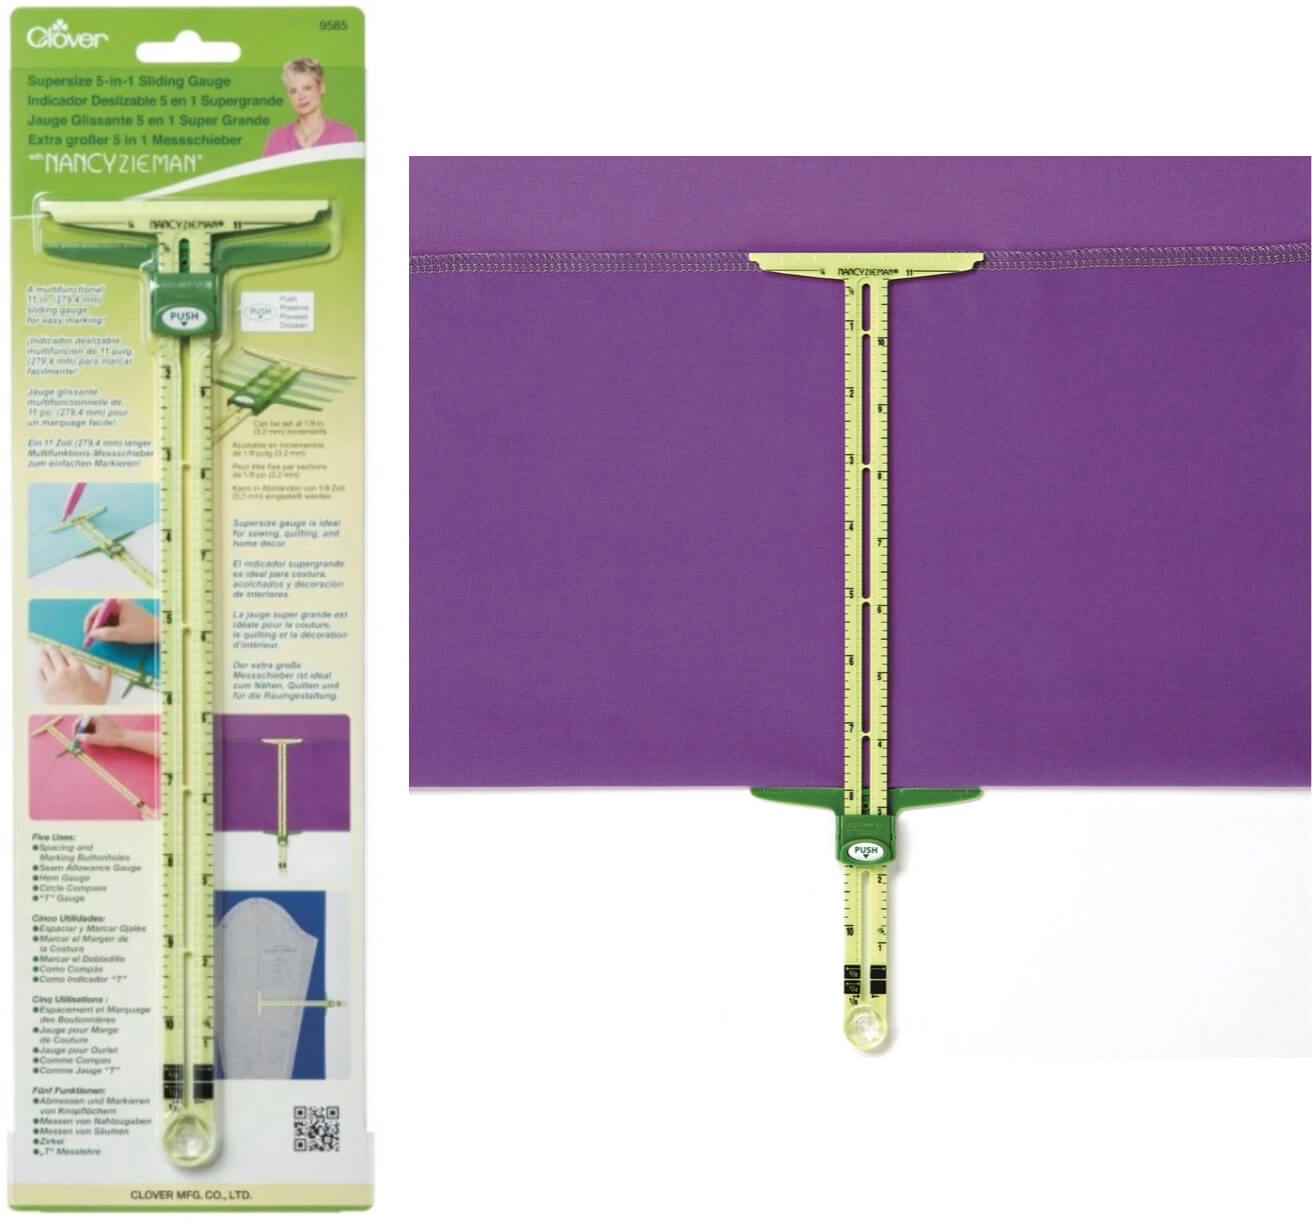 Clover's Supersize 5-in-1 Sliding Gauge Available at Nancy Zieman Productions at ShopNZP.com